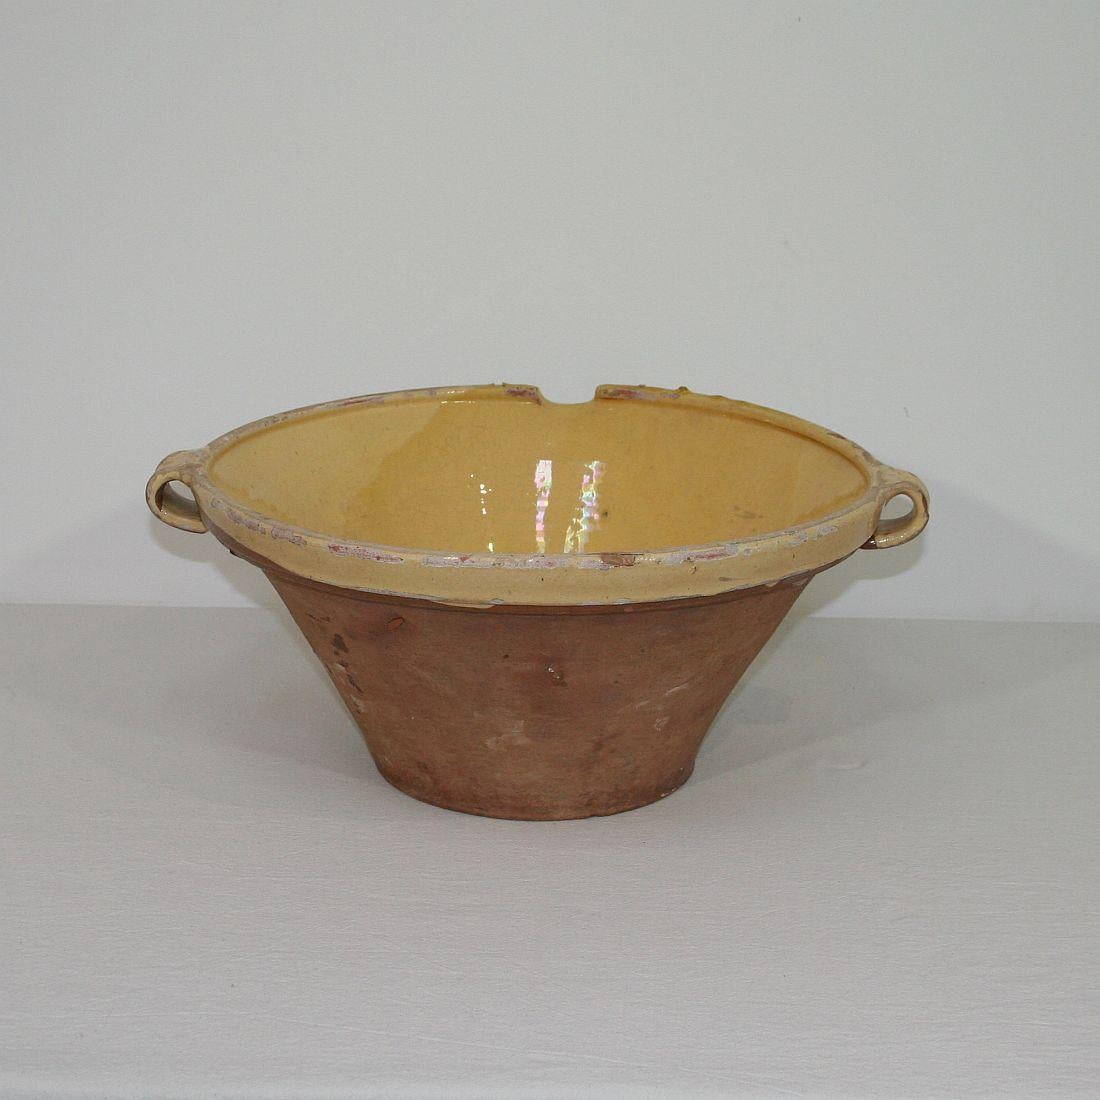 Earthenware 19th Century French Glazed Terracotta Dairy Bowl or Tian